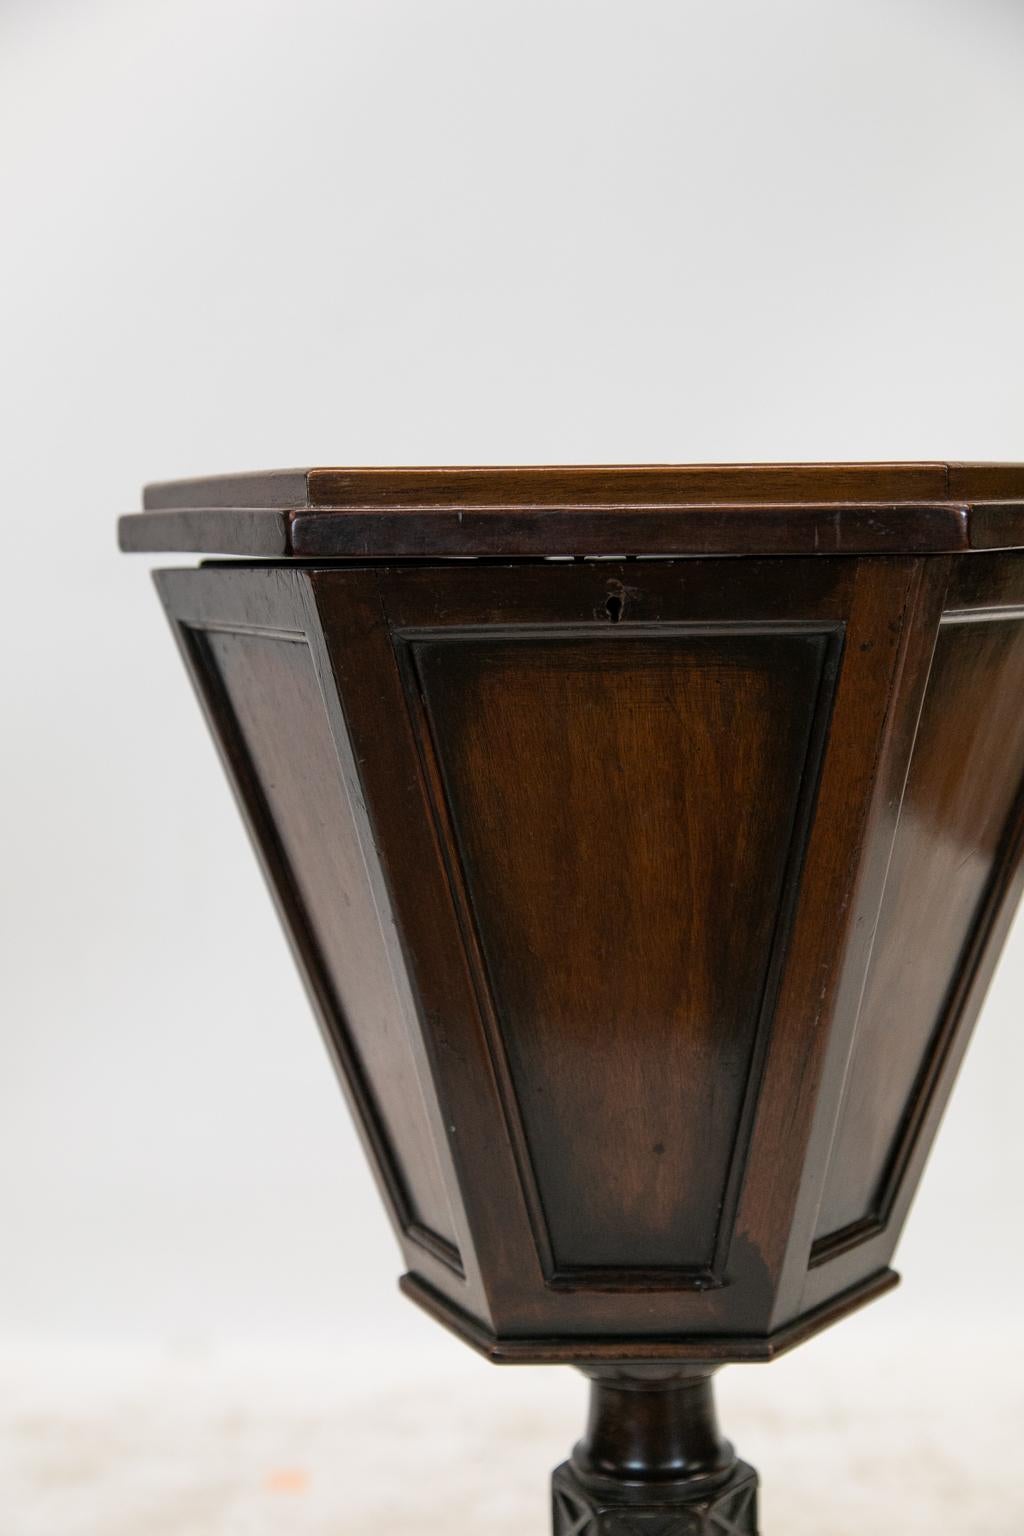 The top of this English mahogany hexagonal sewing table has a bullnose gallery. The body is in a trapezoid shape. The six sides have recessed panels with molded edges. The stem has a carved blind fretwork hexagonal knob. The tripod legs have carved